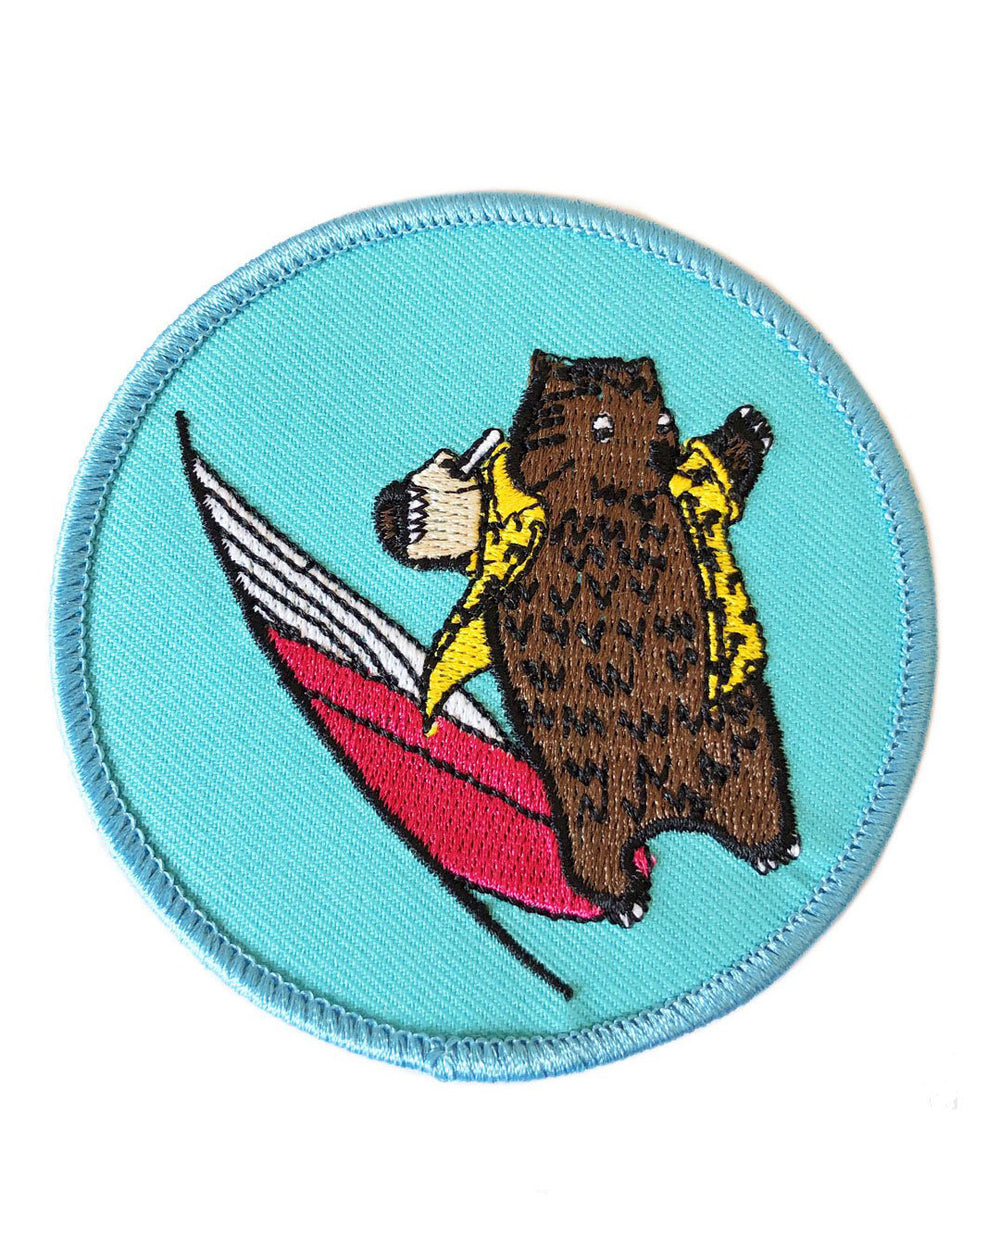 Surfing Wombat Embroidered Patch